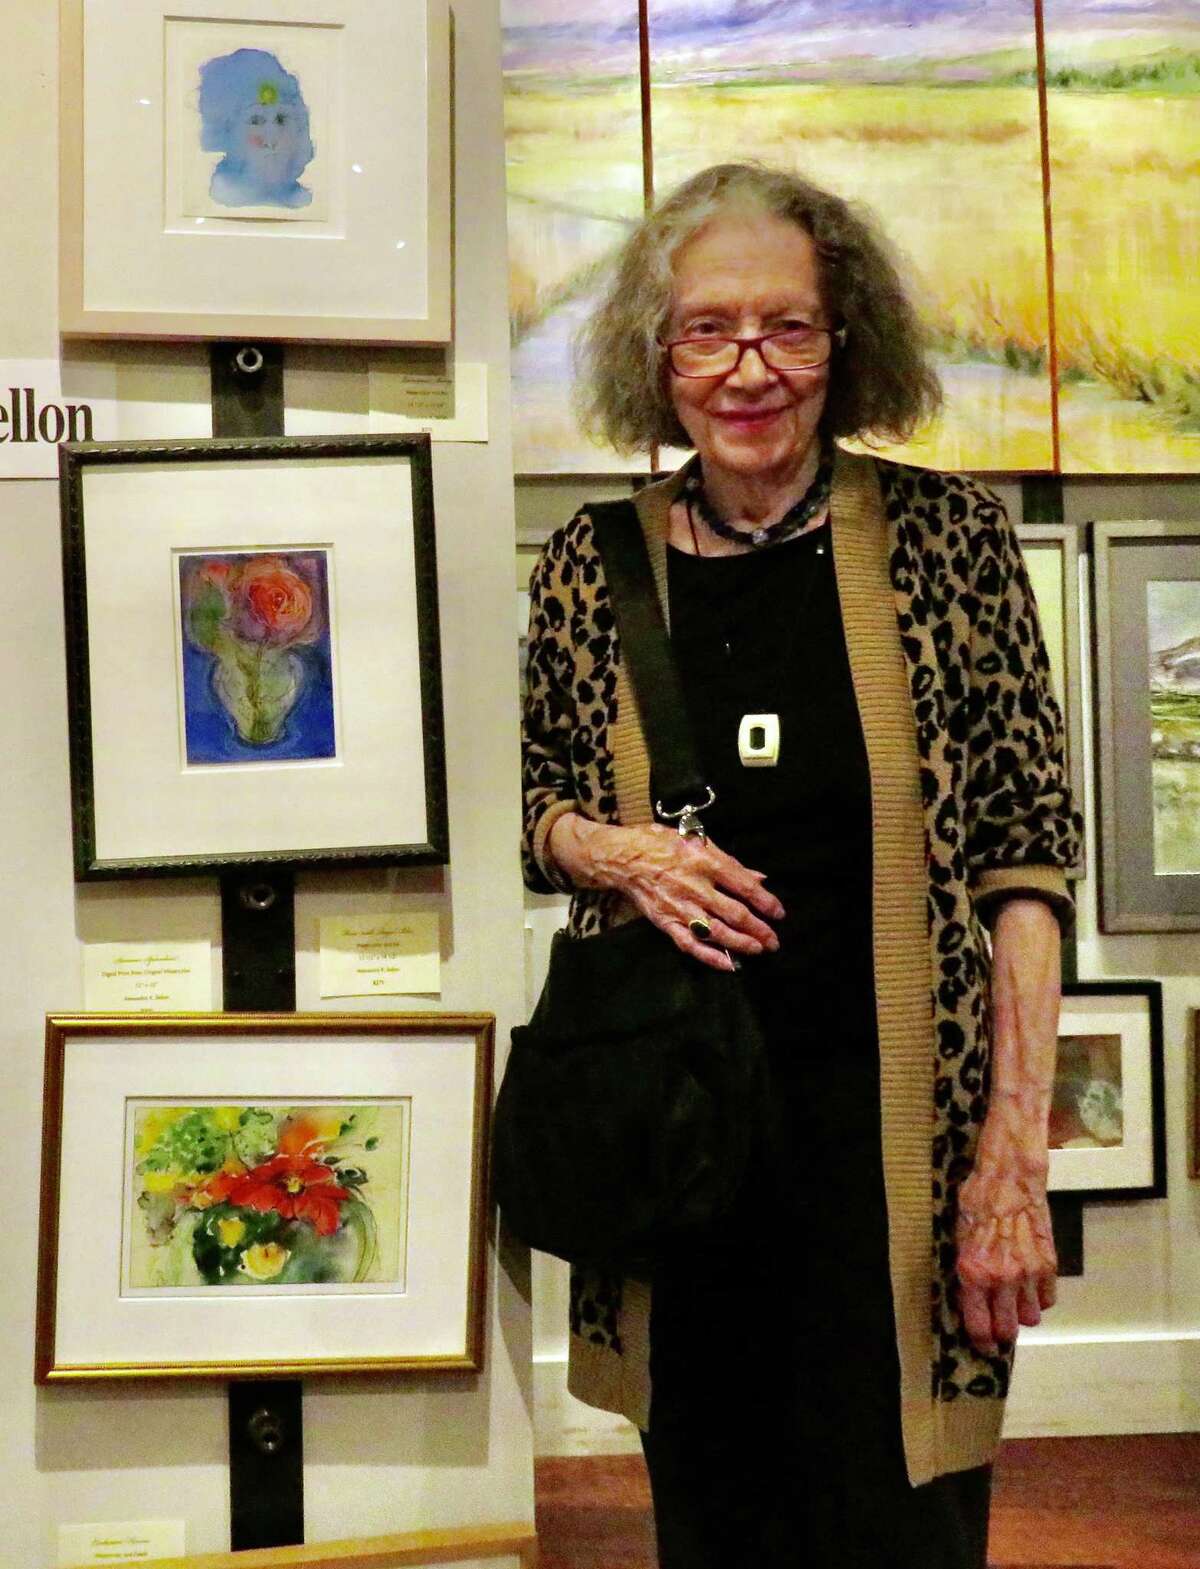 Watercolorist Alexandra K. Sellon at opening for BACA fall gallery exhibit on Branford’s Main Street.